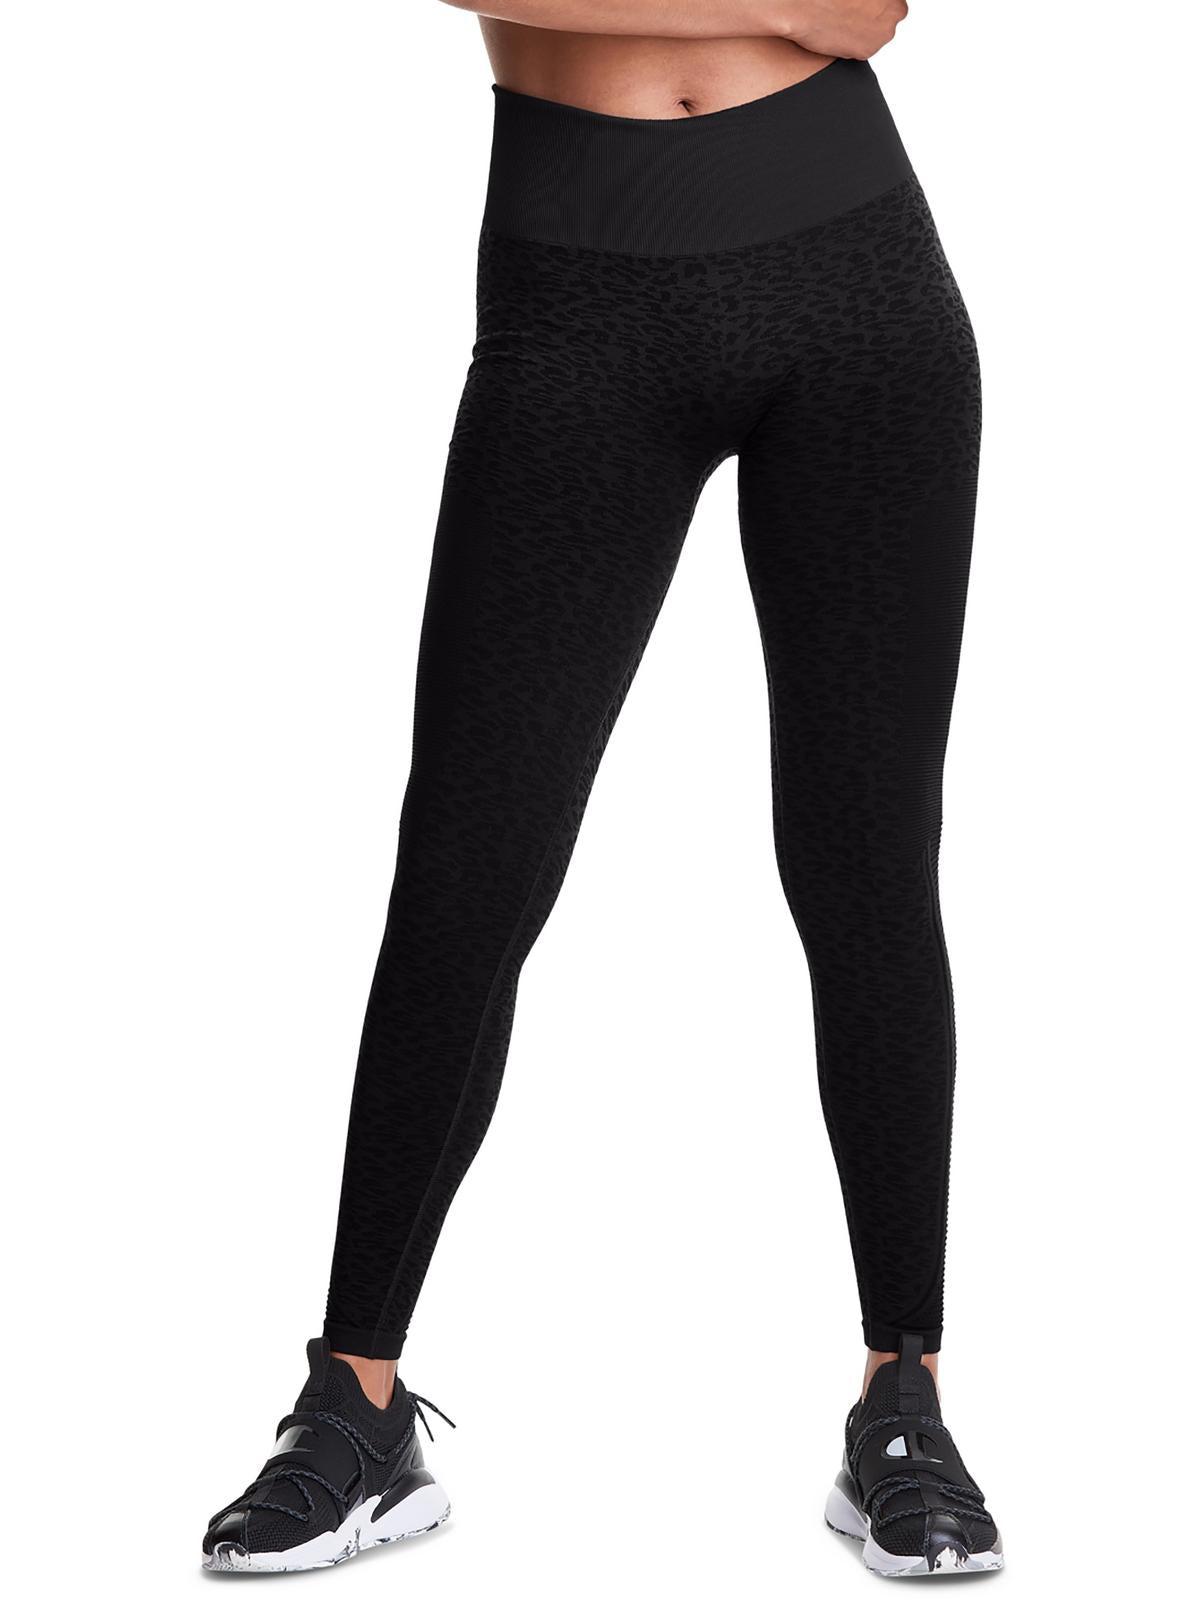 Champion The Infinity Animal Print High Rise Athletic Leggings in